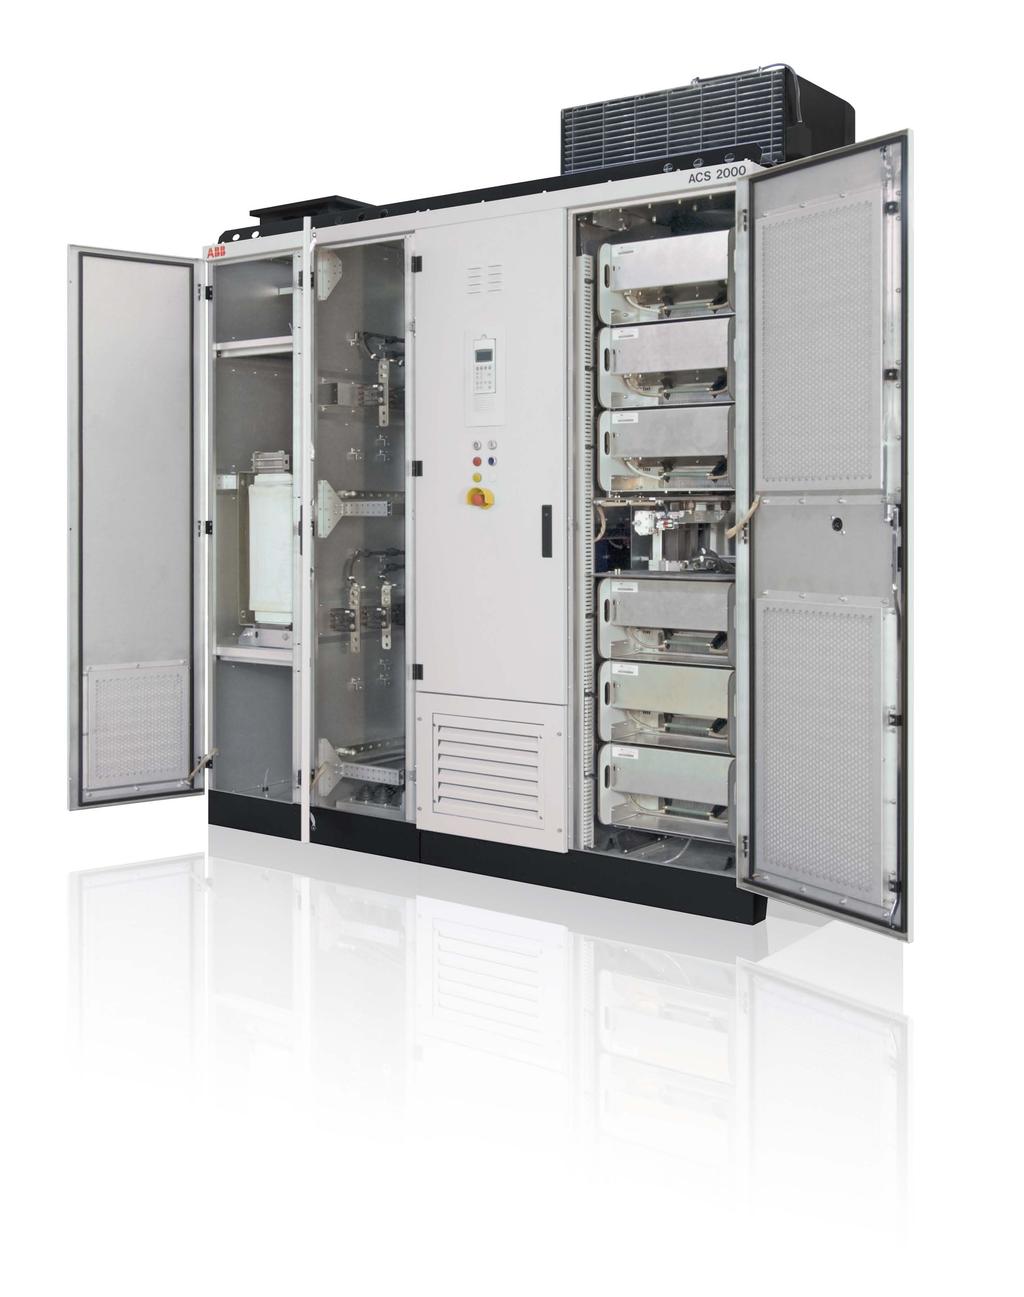 It is designed for easy installation, fast commissioning and efficient maintenance reducing the total cost of ownership. ACS 2000 direct-to-line, 800 kw, 6.